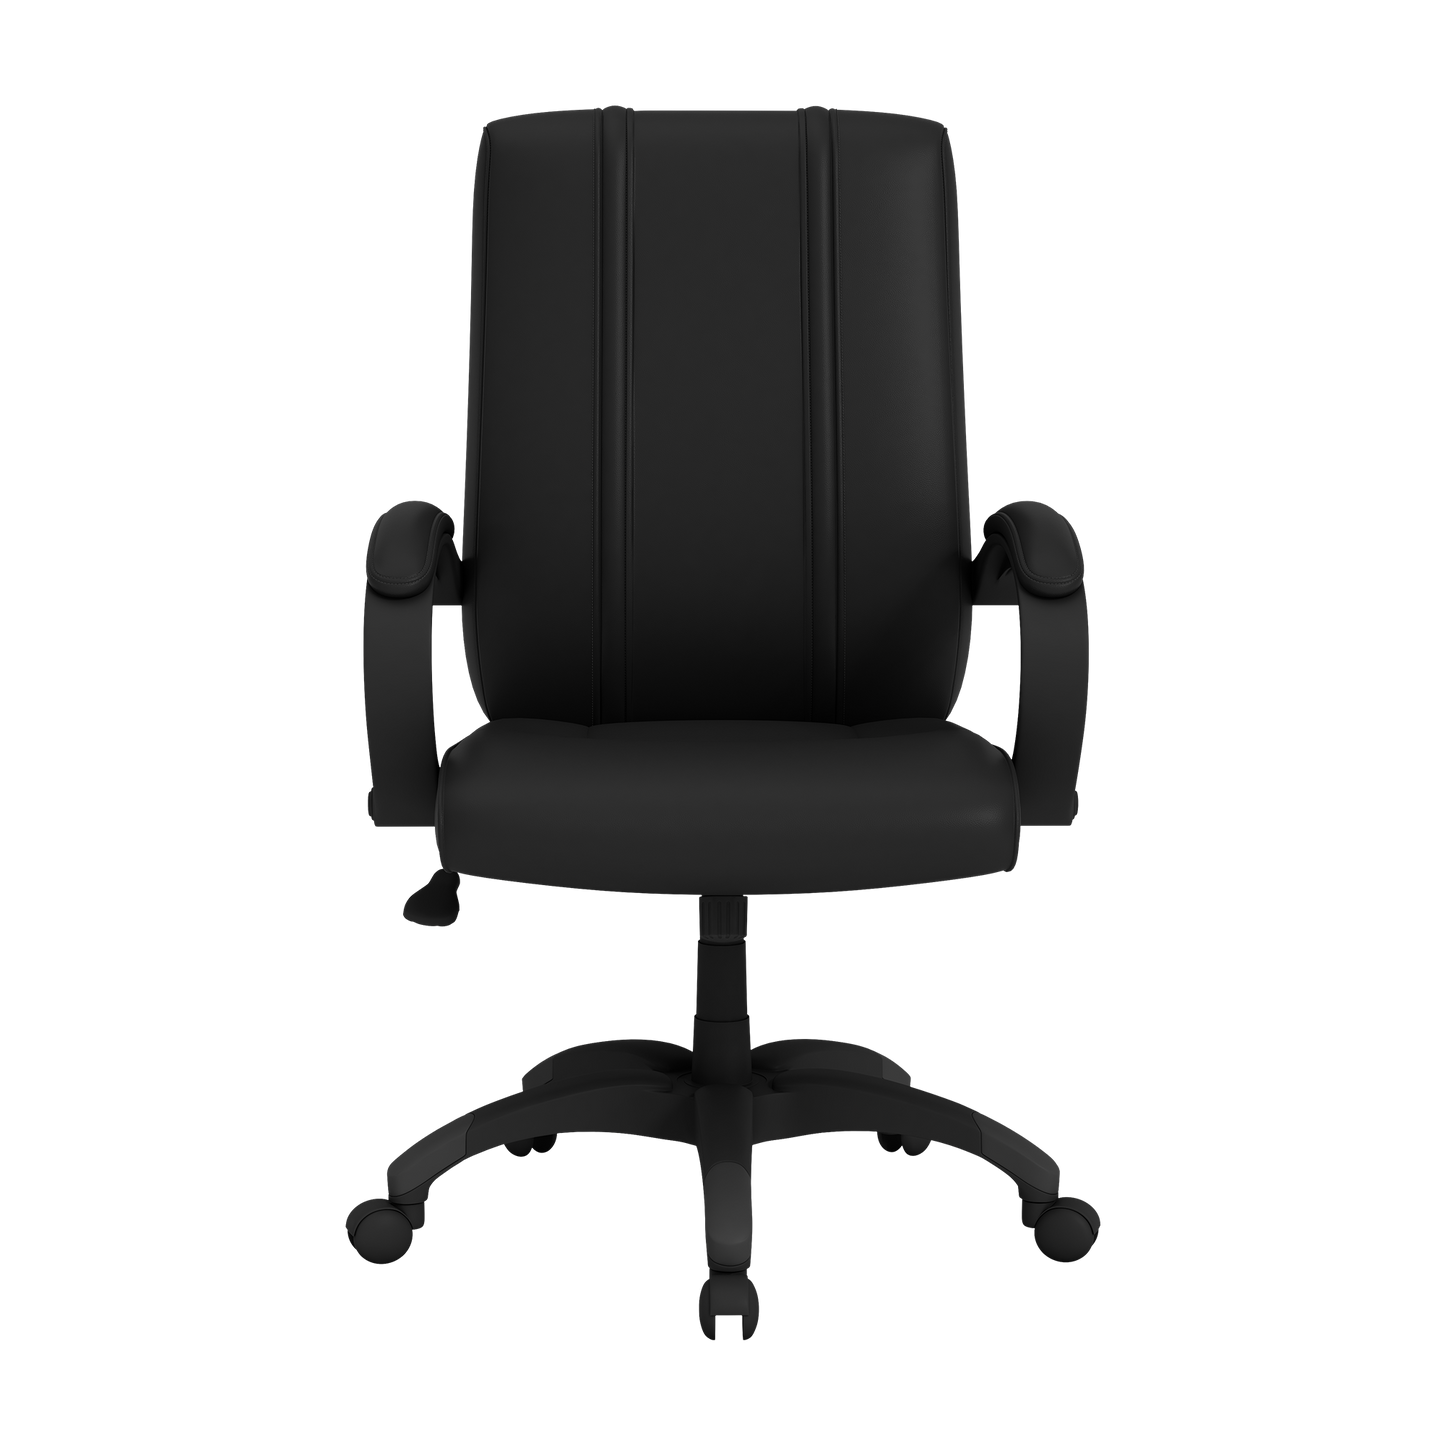 Office Chair 1000 with San Francisco Giants Secondary